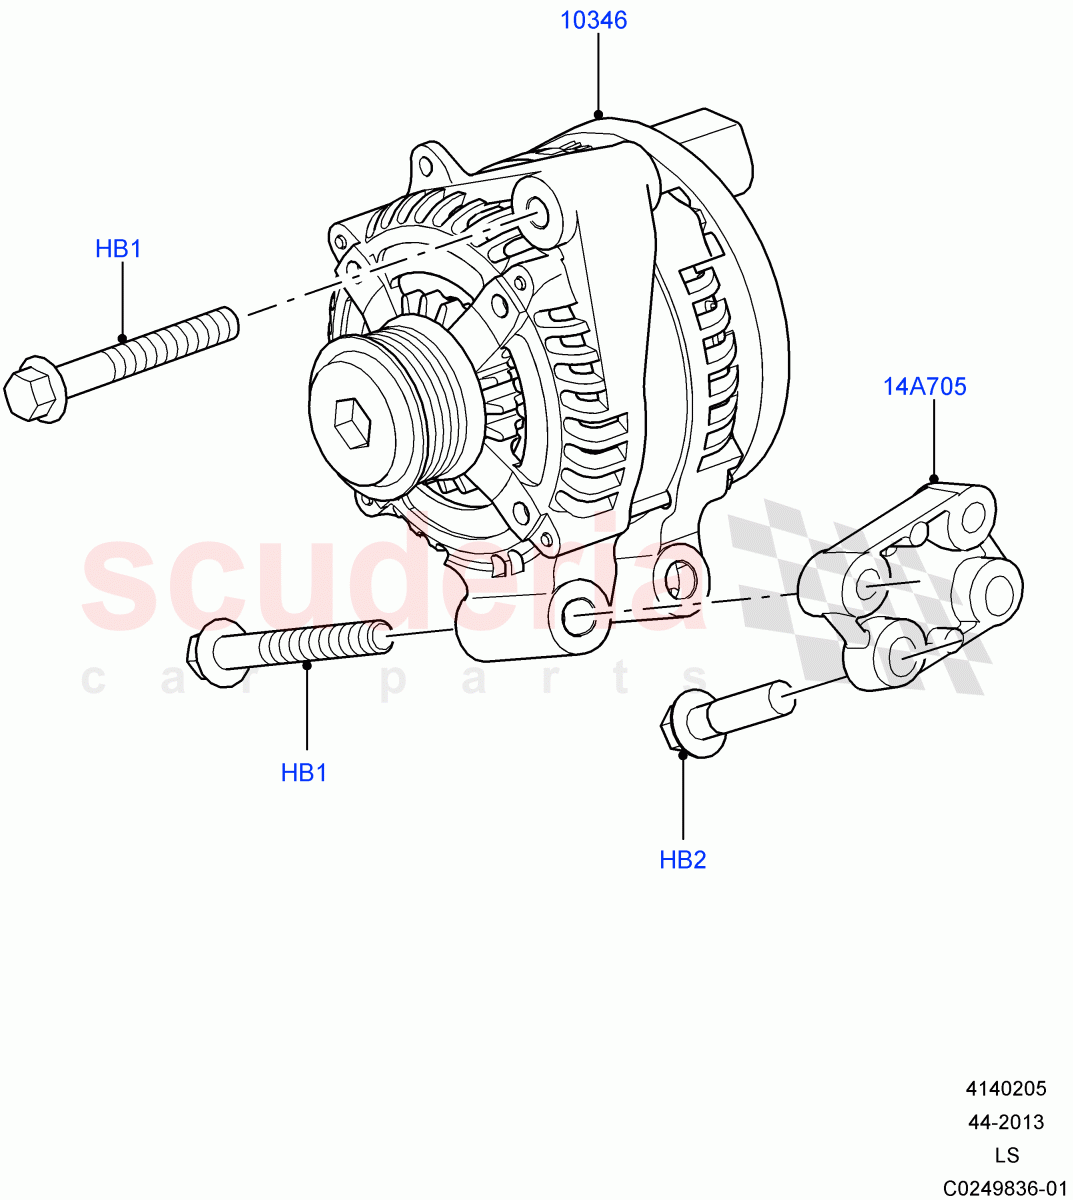 Alternator And Mountings(3.0L DOHC GDI SC V6 PETROL)((V)FROMEA000001) of Land Rover Land Rover Discovery 4 (2010-2016) [4.0 Petrol V6]